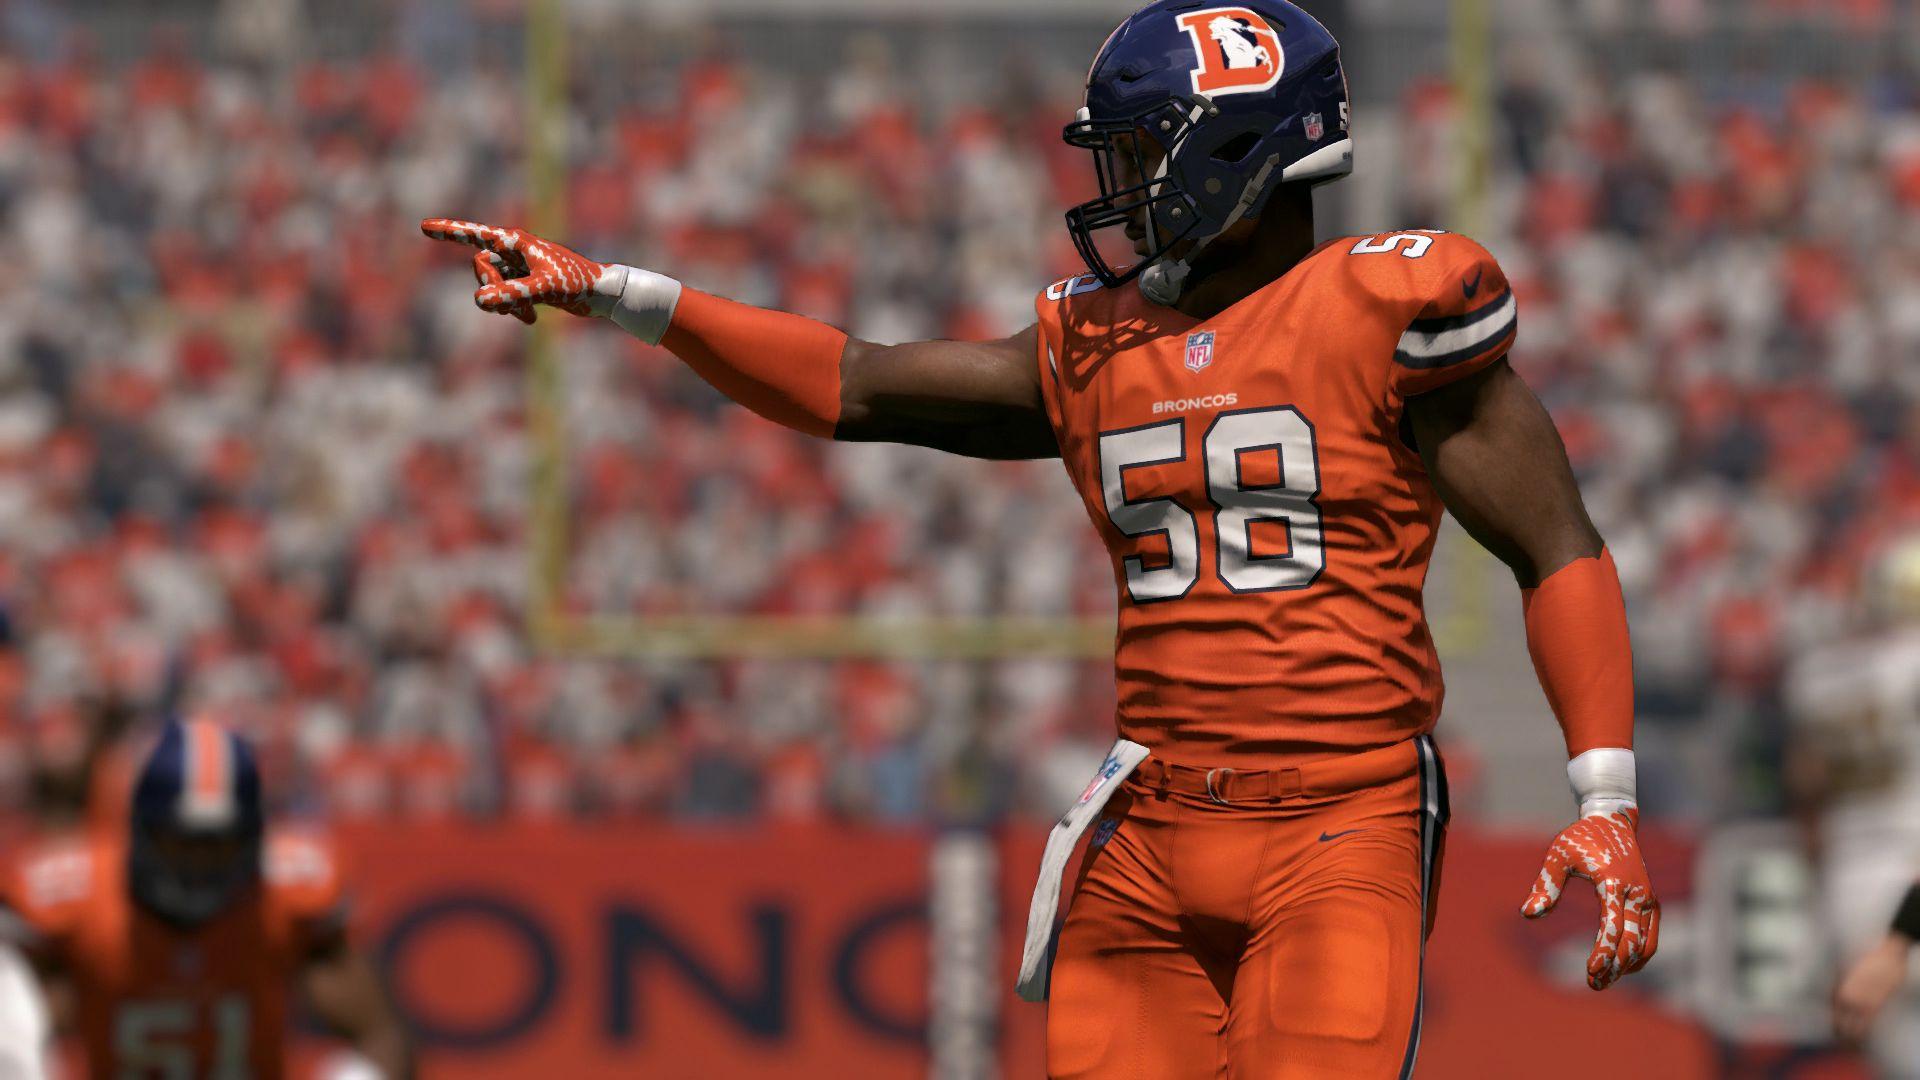 Madden NFL 19: Graphics and Presentation